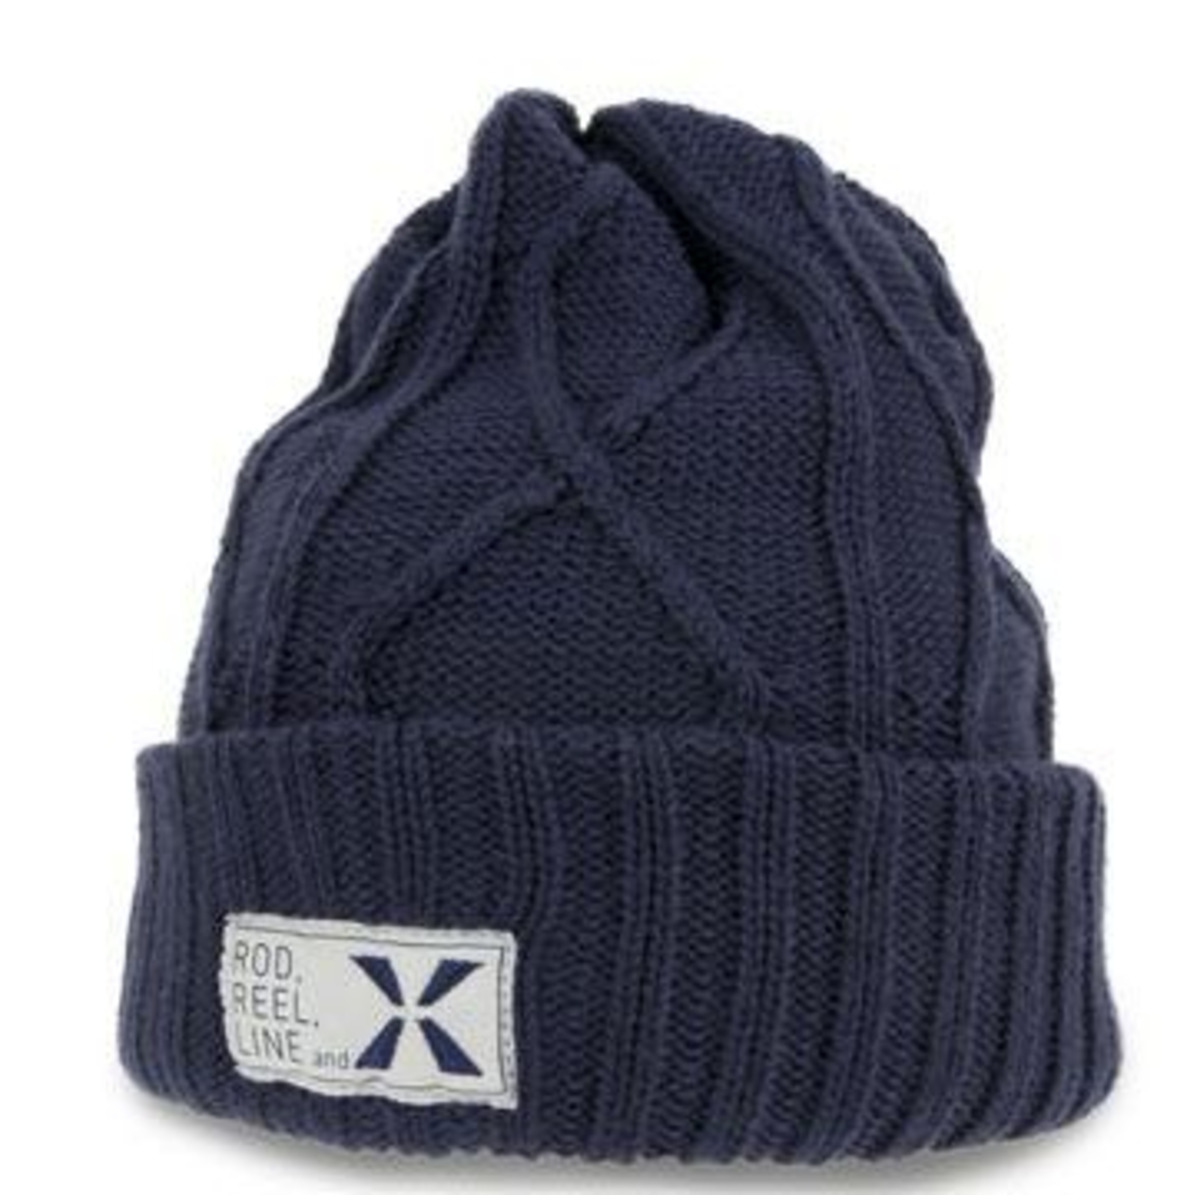 Shimano Cappello Cable Knit Xefo Megaheat - Navy